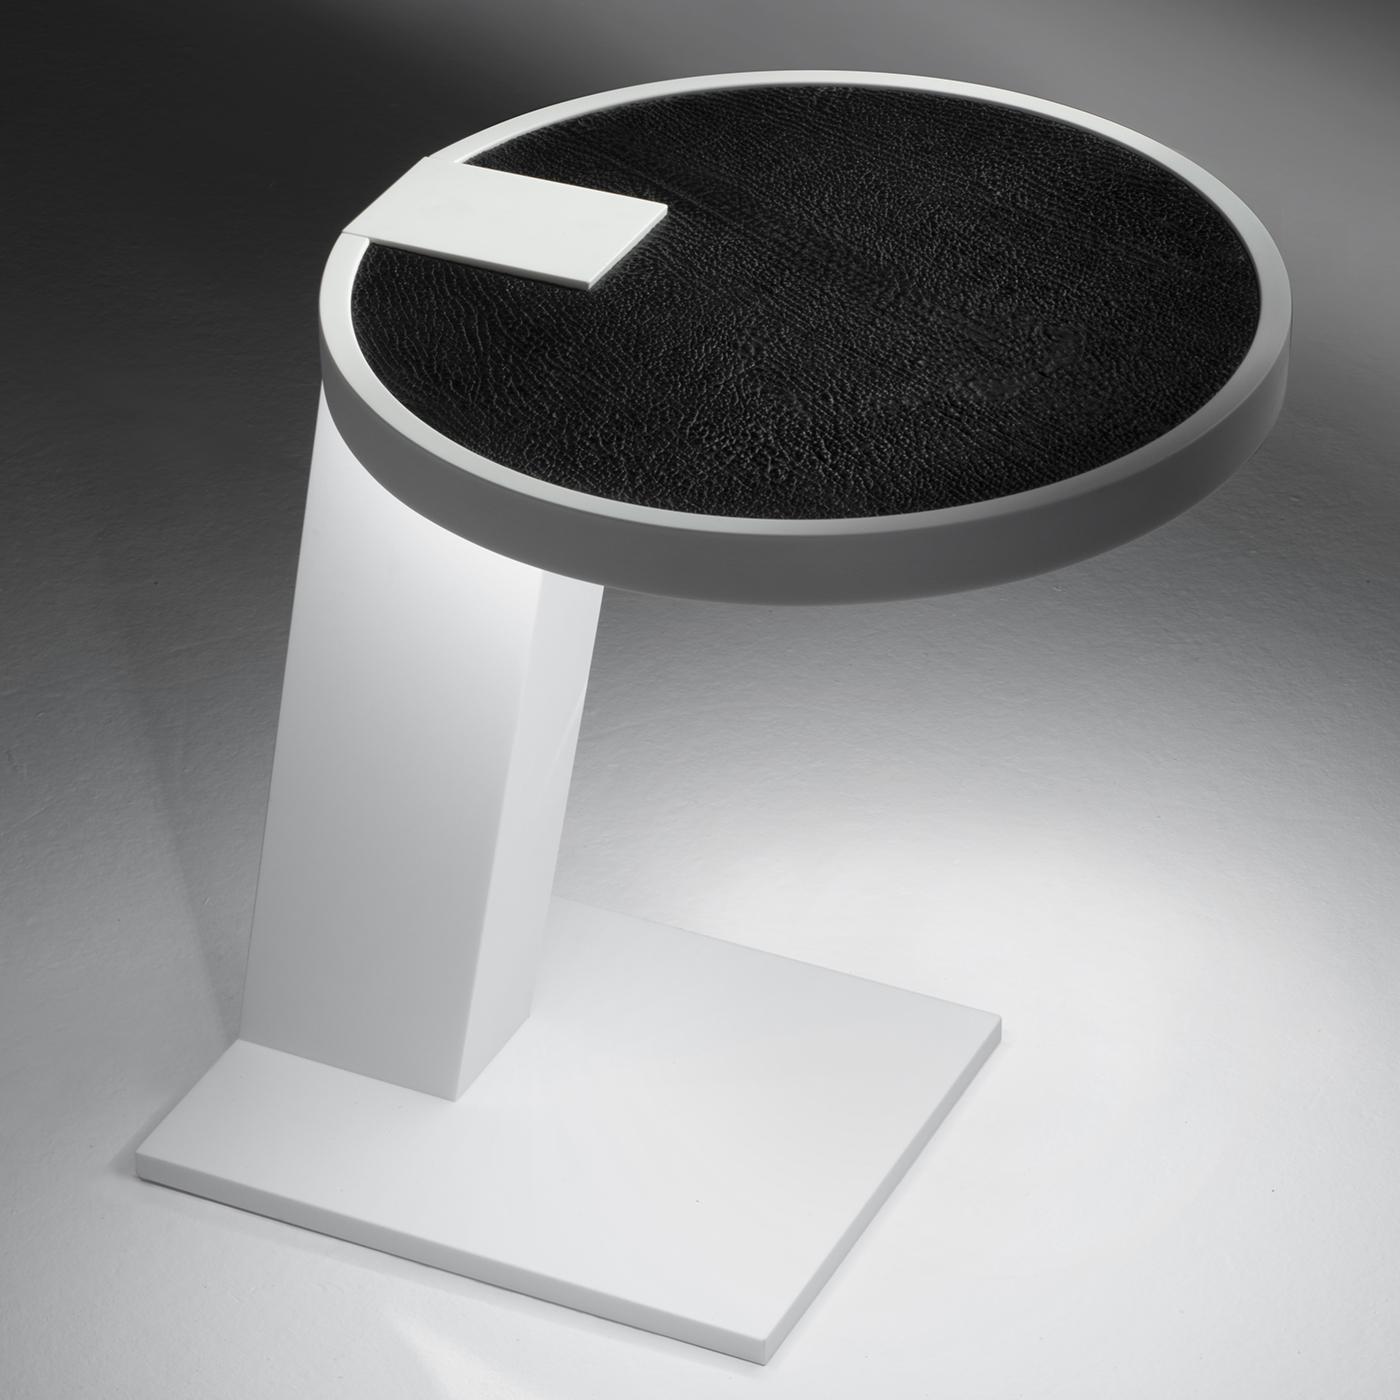 This sculptural work of art functions as a side table with pure geometric volumes and chromatic contrast. The smooth and silky Corian DuPont of the base serves as mounting for the sharkskin of the round top, which houses an infinity sensor that